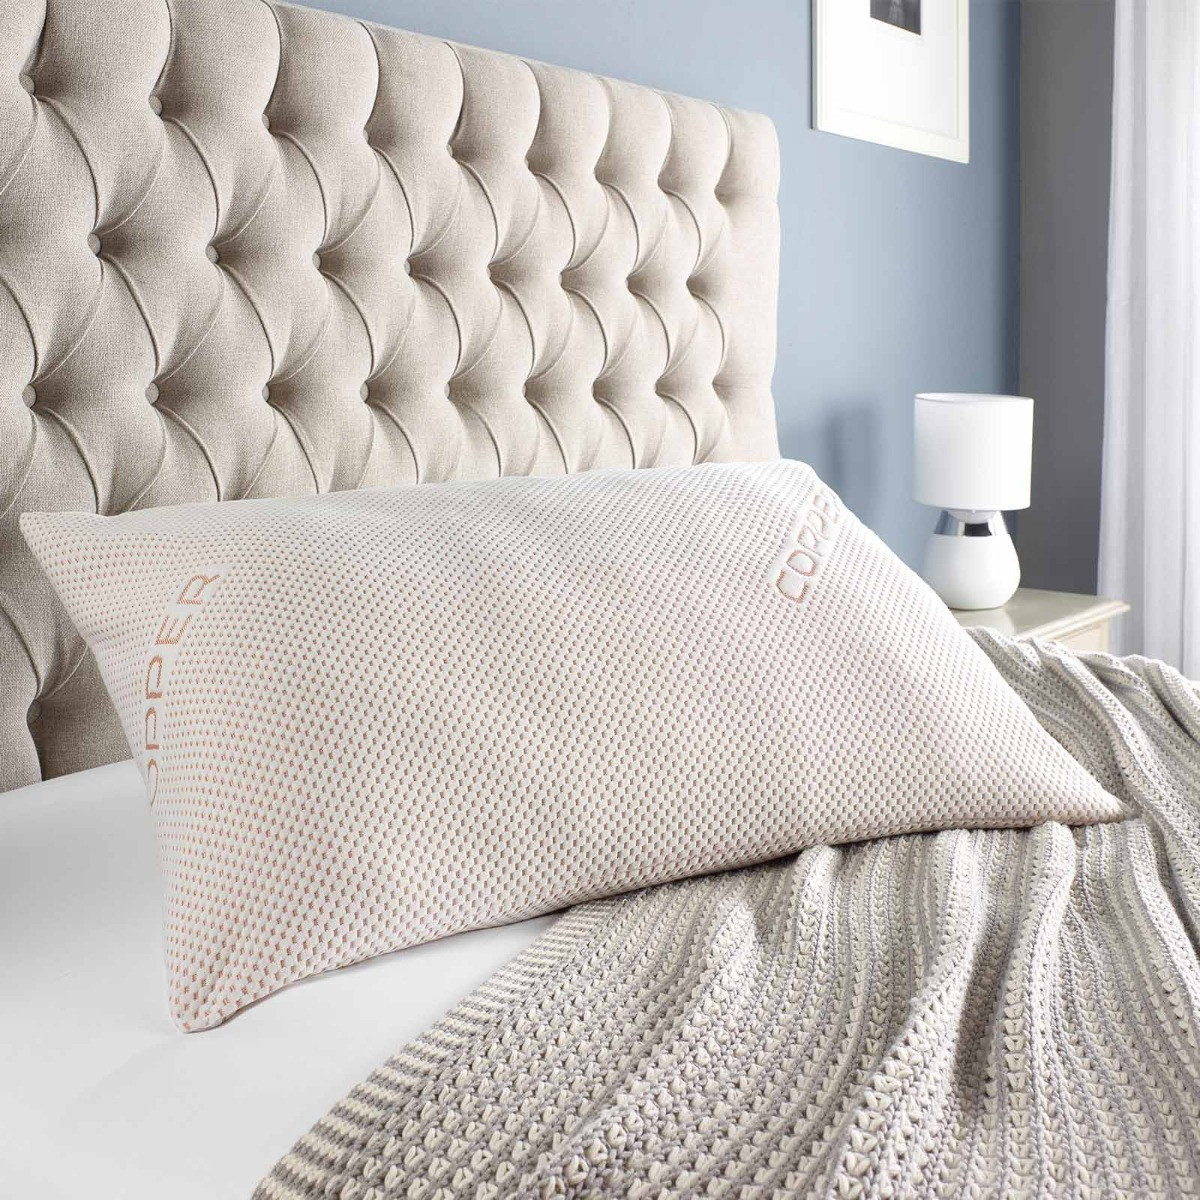 Downland Copper Infused Pillow - White>